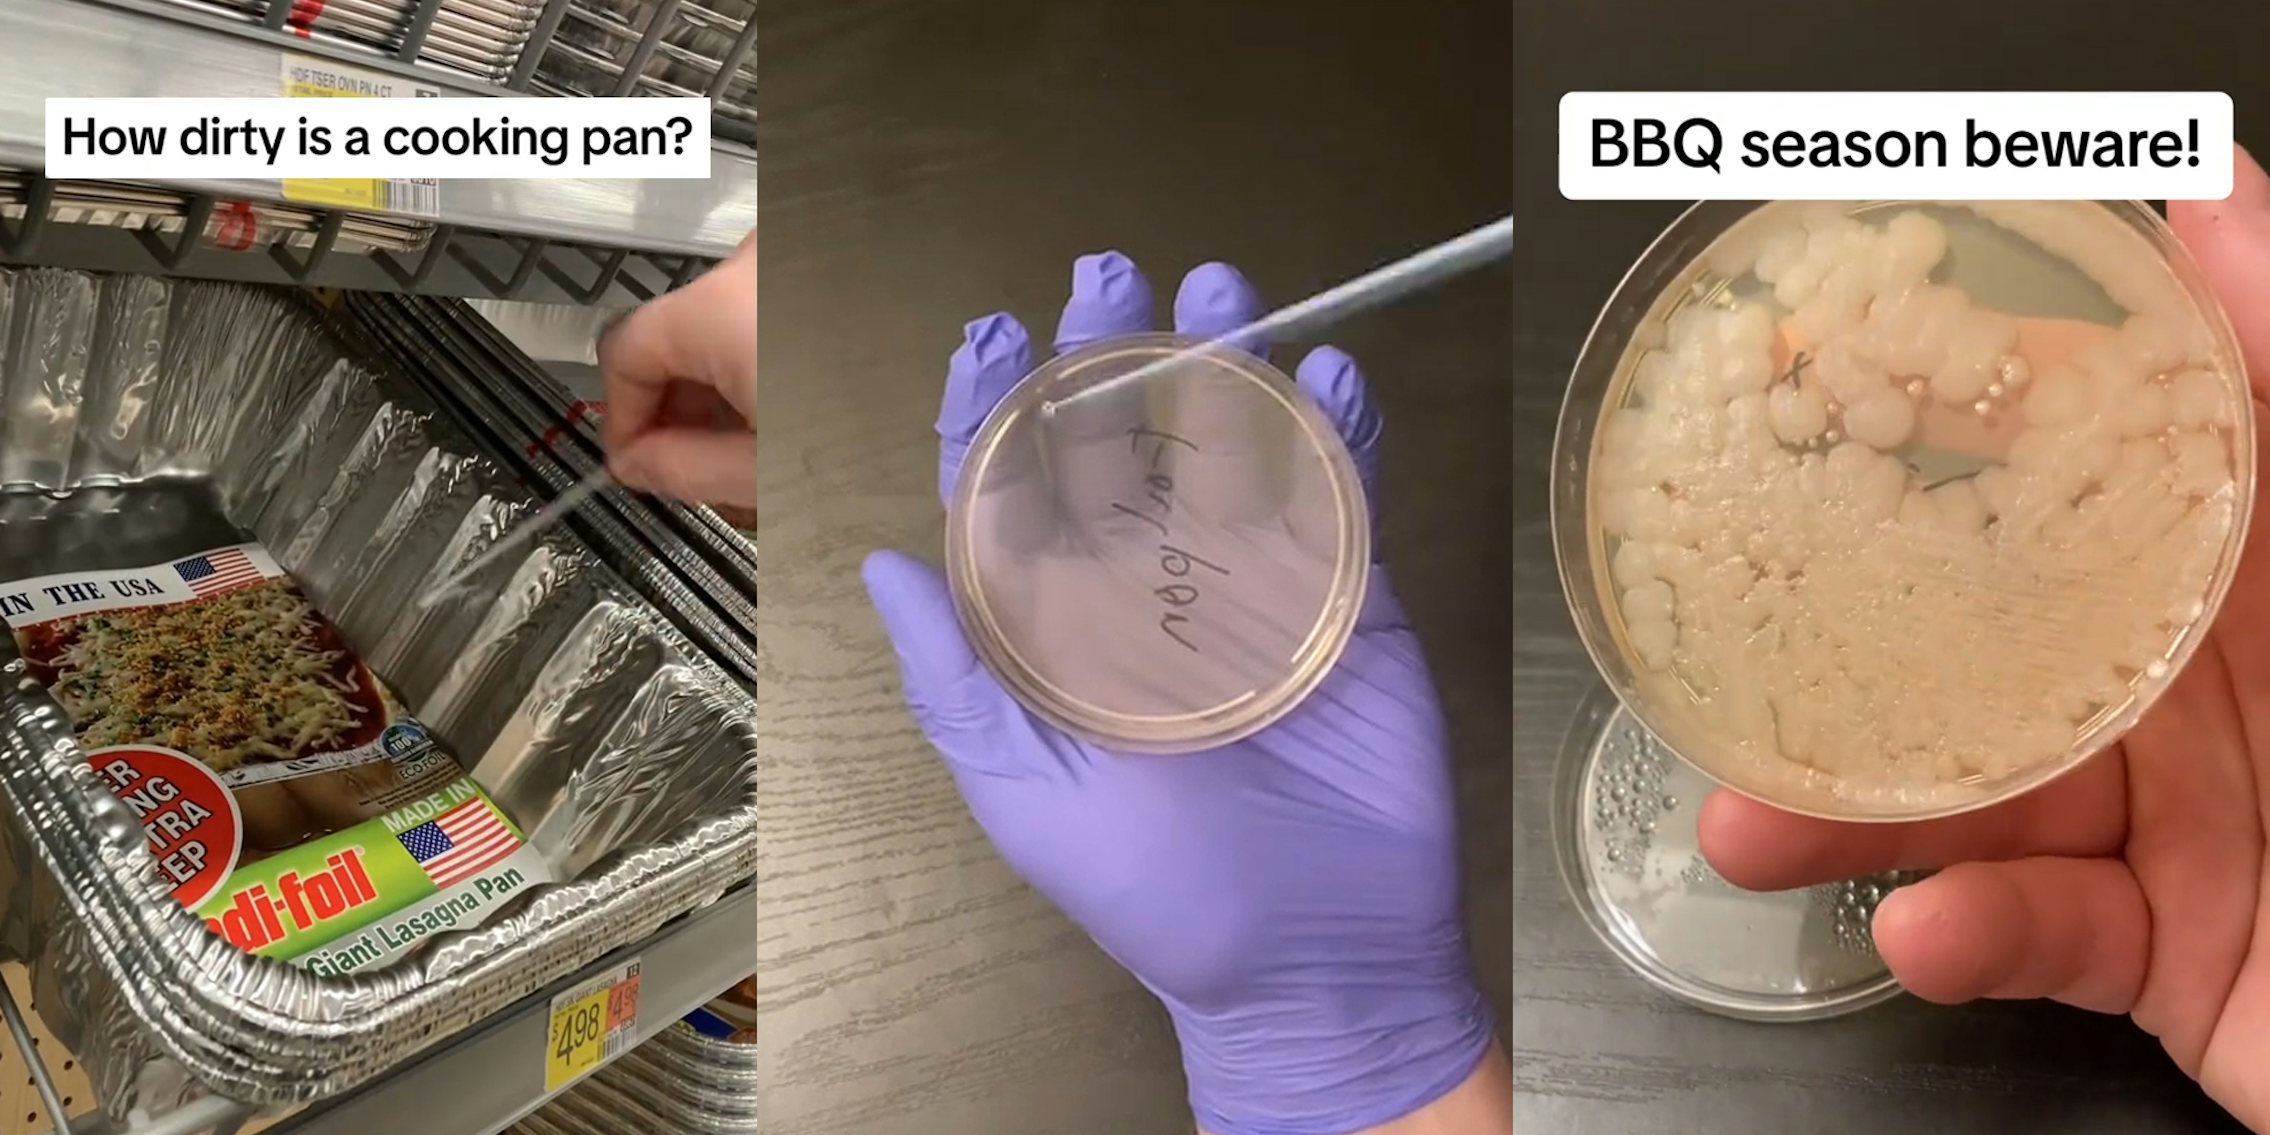 person swabbing cooking pan in store with caption 'How dirty is a cooking pan?' (l) gloved hand swabbing inside petri dish c) petri dish with bacteria with caption 'BBQ season beware!' (r)